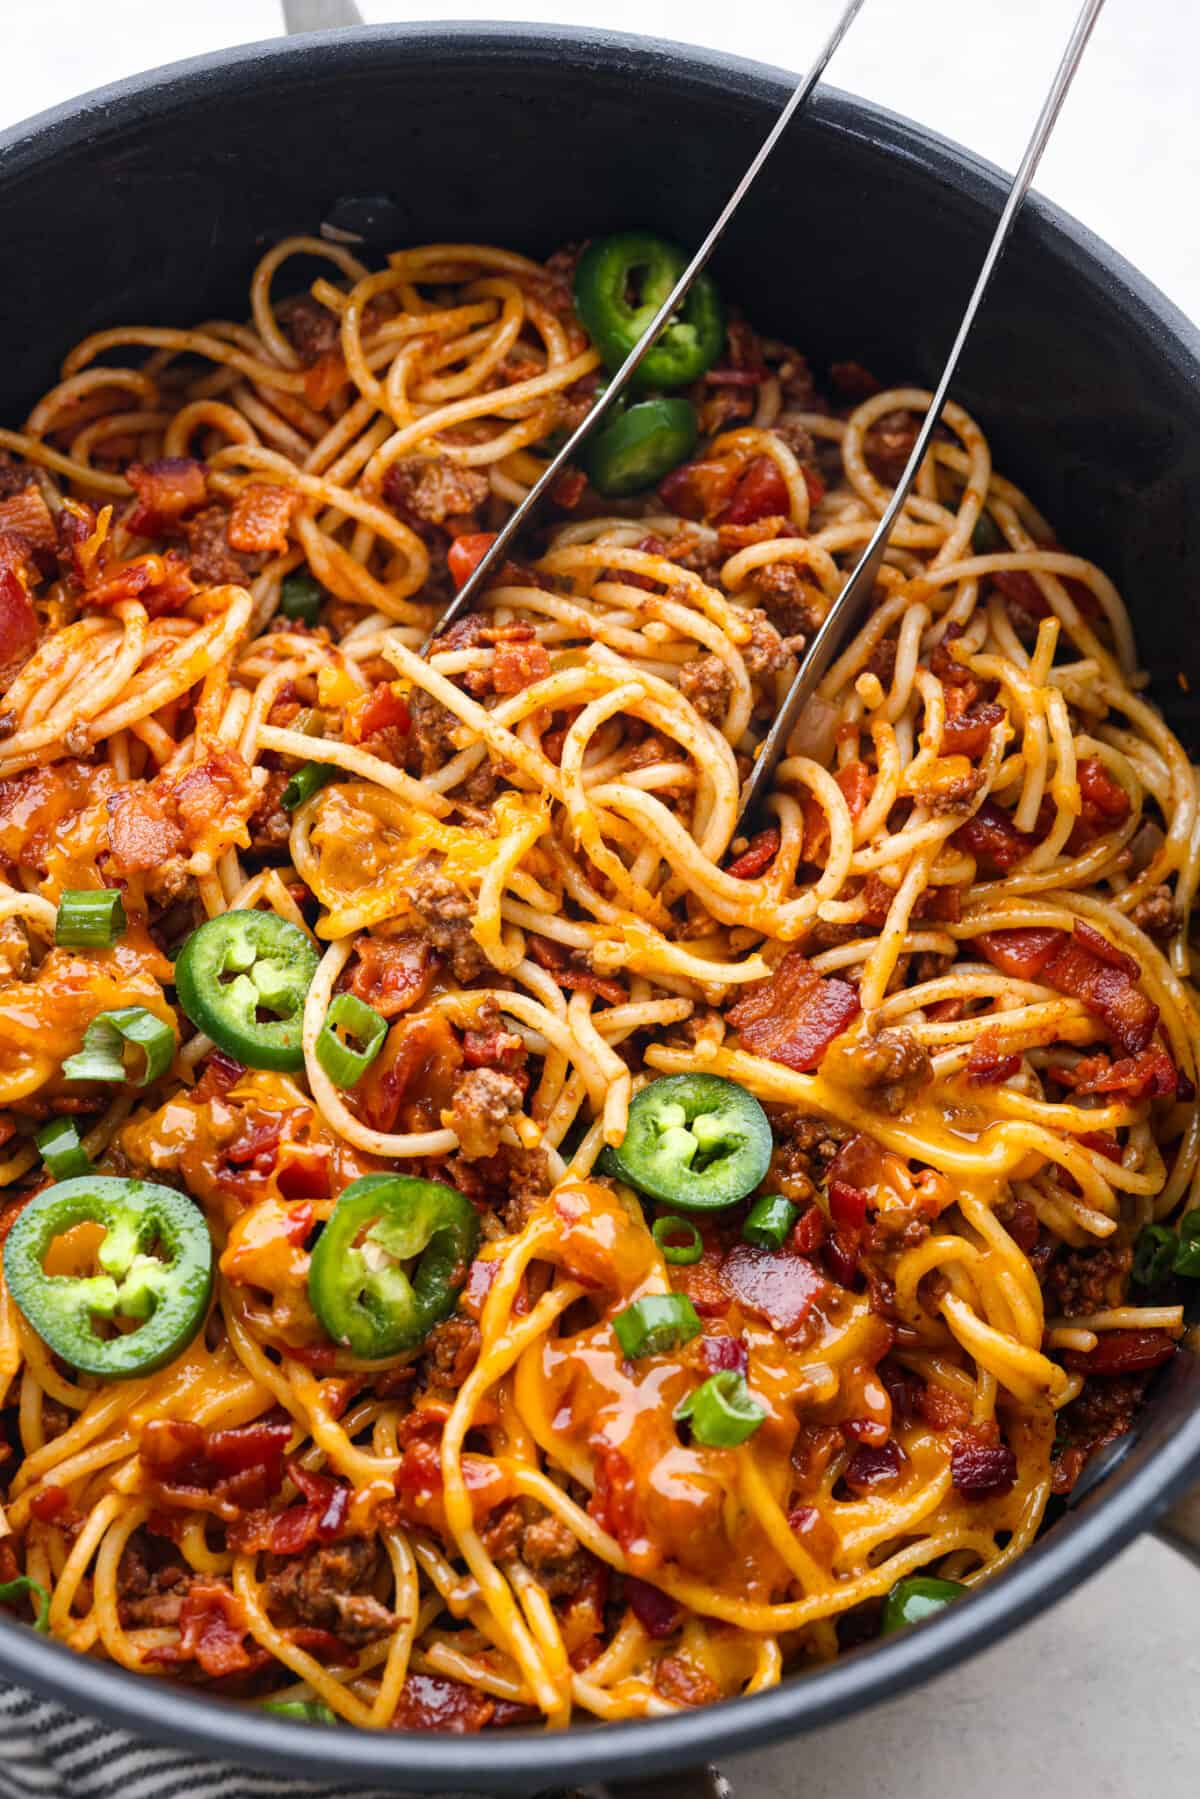 Spaghetti topped with shredded cheese, bacon, and jalapenos.